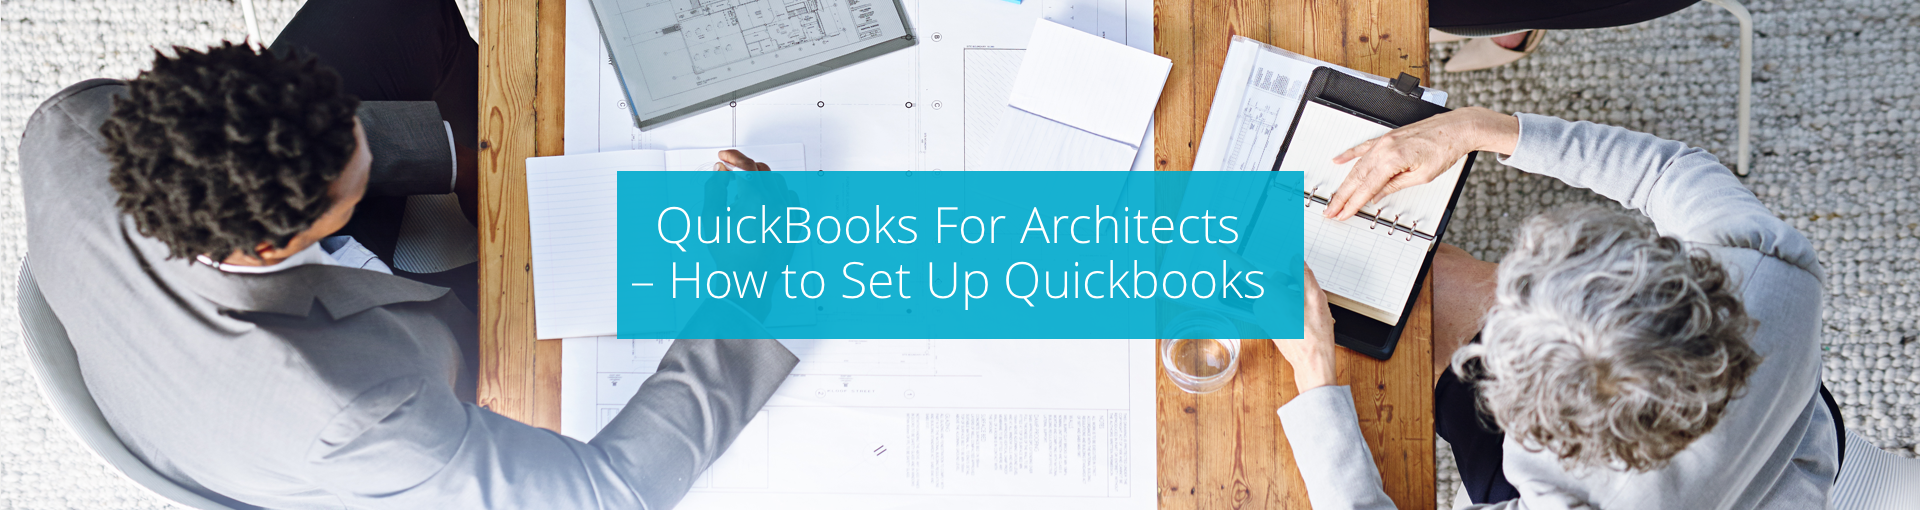 QuickBooks For Architects – How to Set Up Quickbooks Featured Image